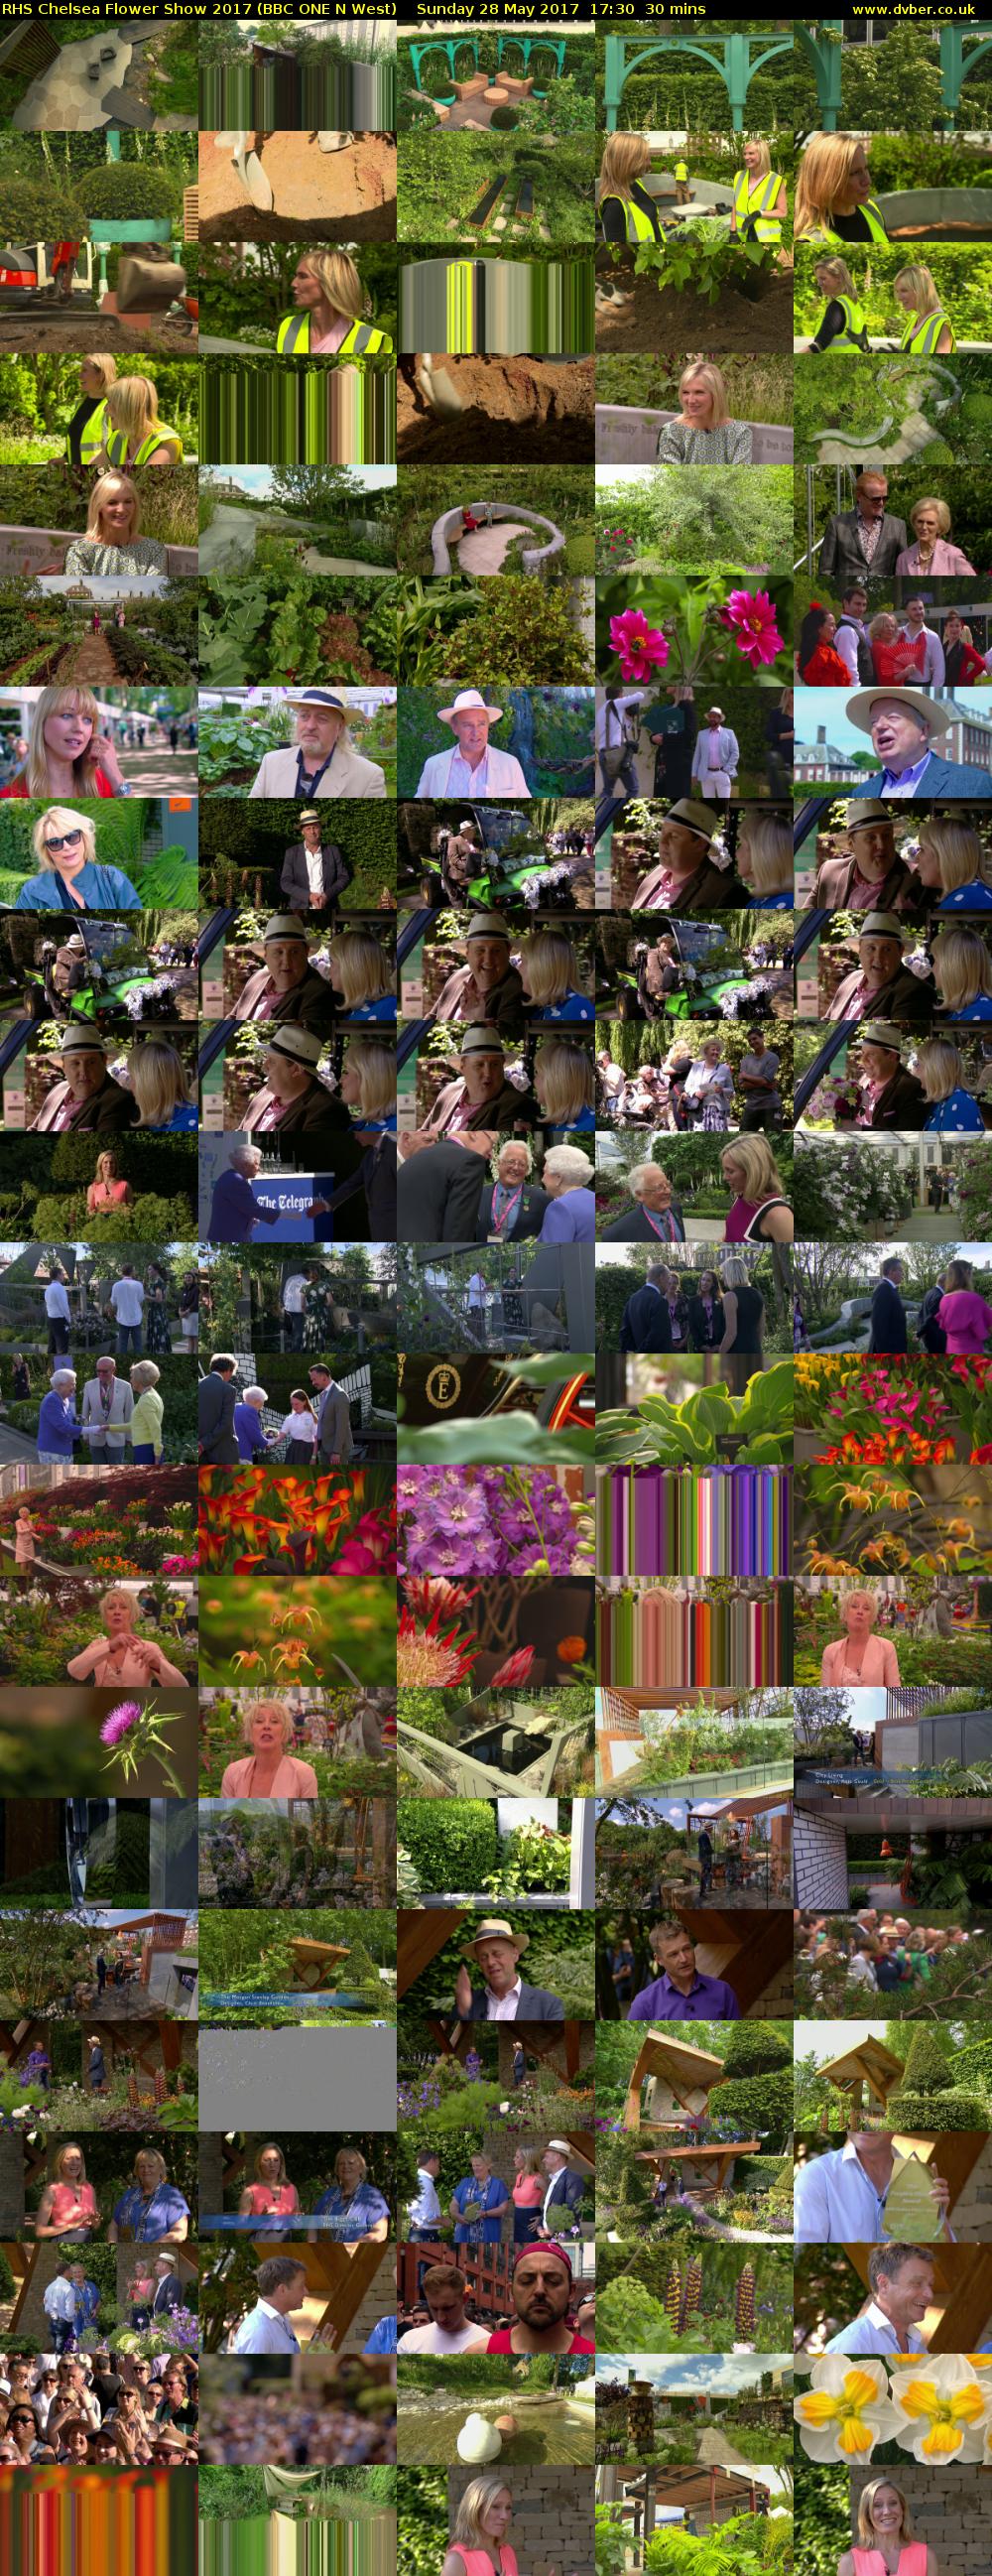 RHS Chelsea Flower Show 2017 (BBC ONE N West) Sunday 28 May 2017 17:30 - 18:00